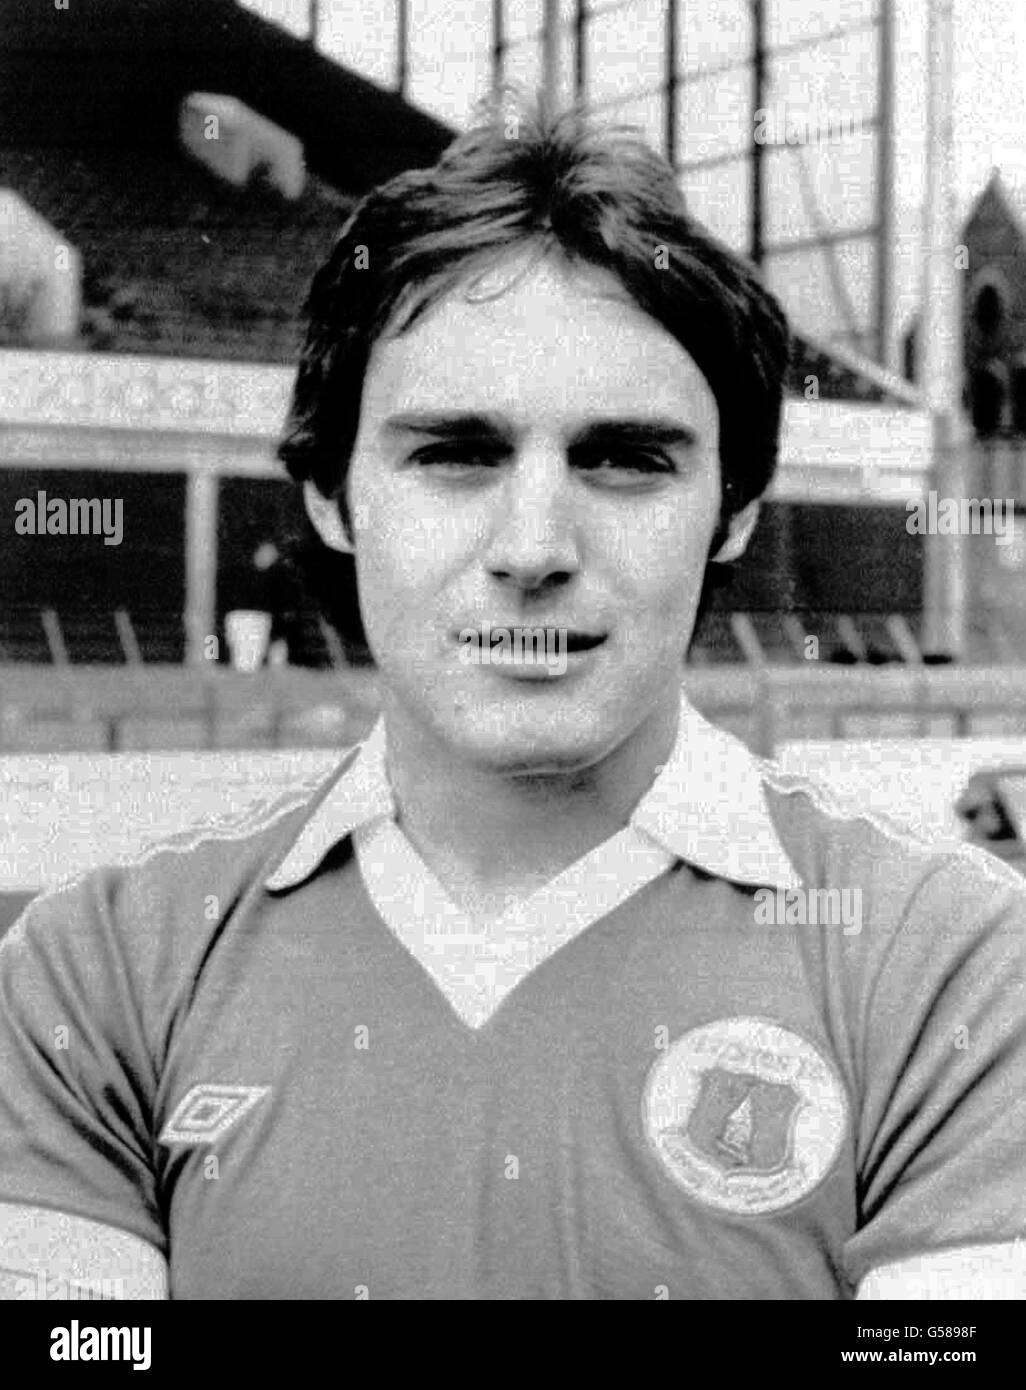 Dave Jones Everton. Dave Jones of First Division Everton before the start of the 1978/79 season at Goodison Park. Stock Photo